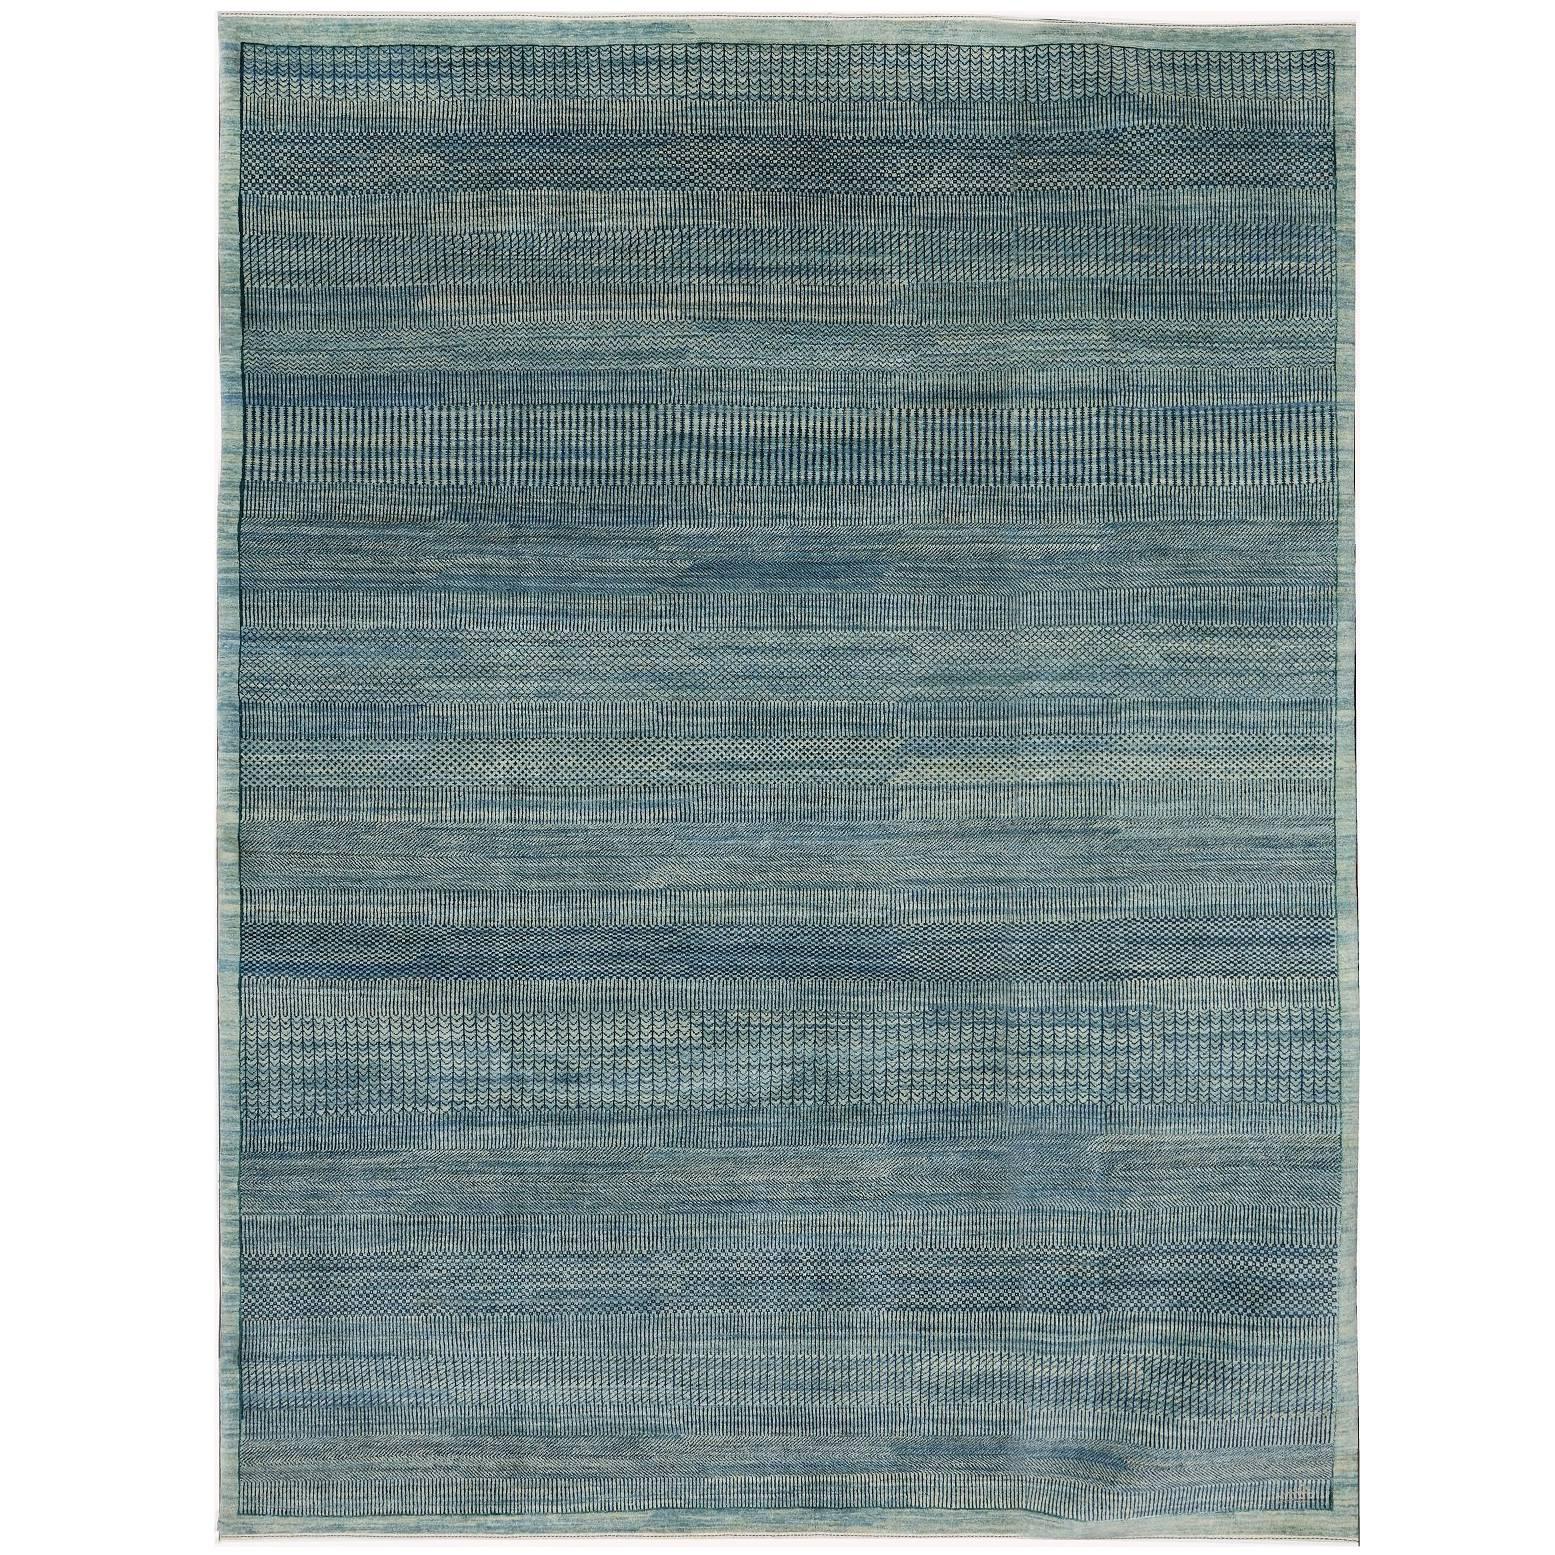 Blue Contemporary Persian Rug, Hand-knotted, Wool, 9’ x 12’